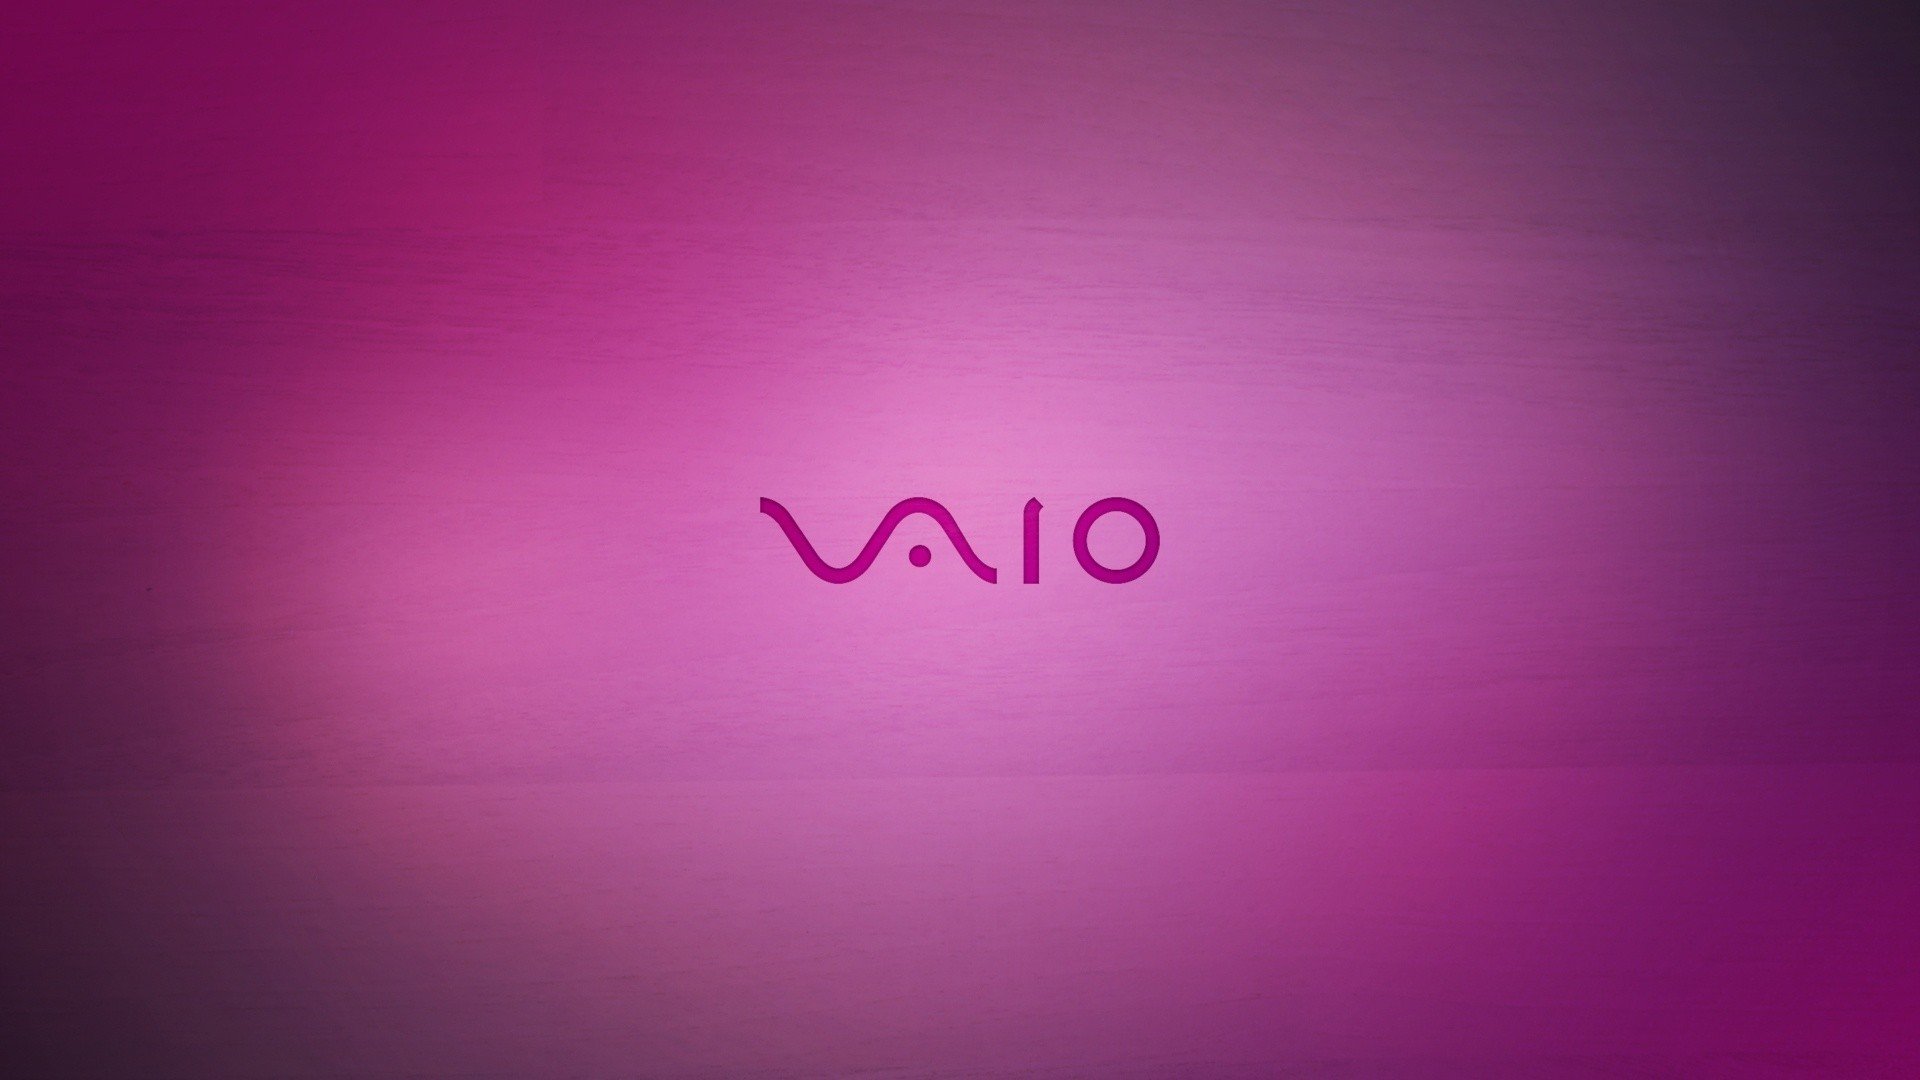 Pink Sony Vaio Hd Wallpapers Desktop And Mobile Images Photos